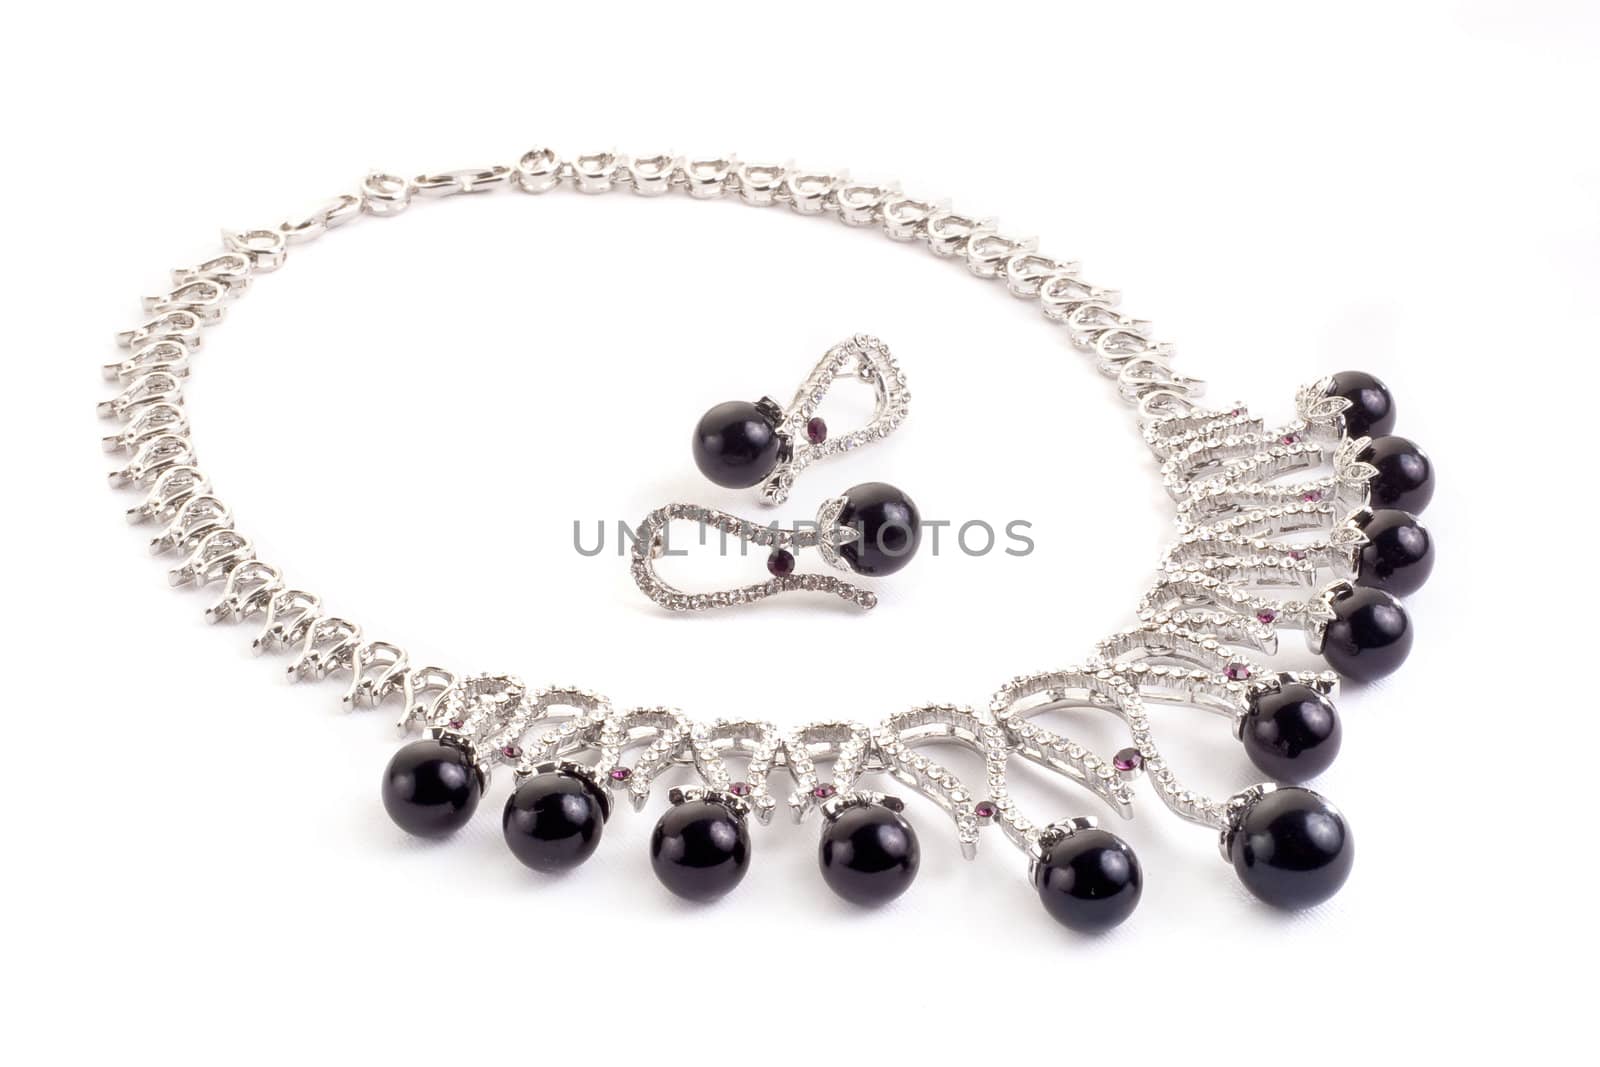 Necklace with black pearls by igor_stramyk